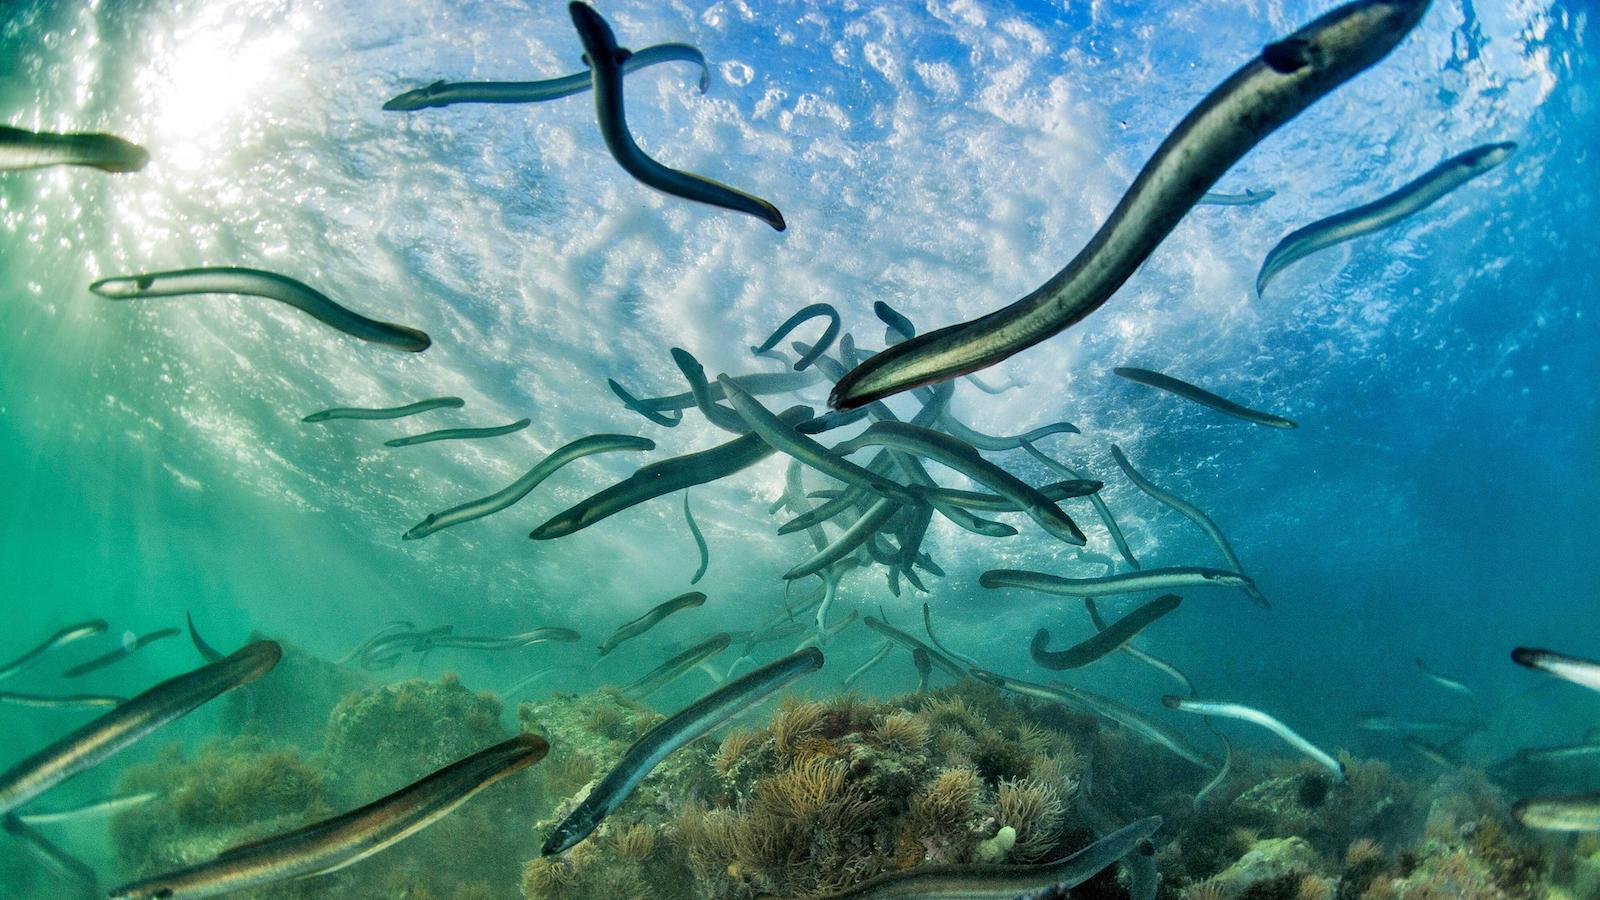 Dire Straits: Can a Fishing Ban Save the Elusive European Eel?